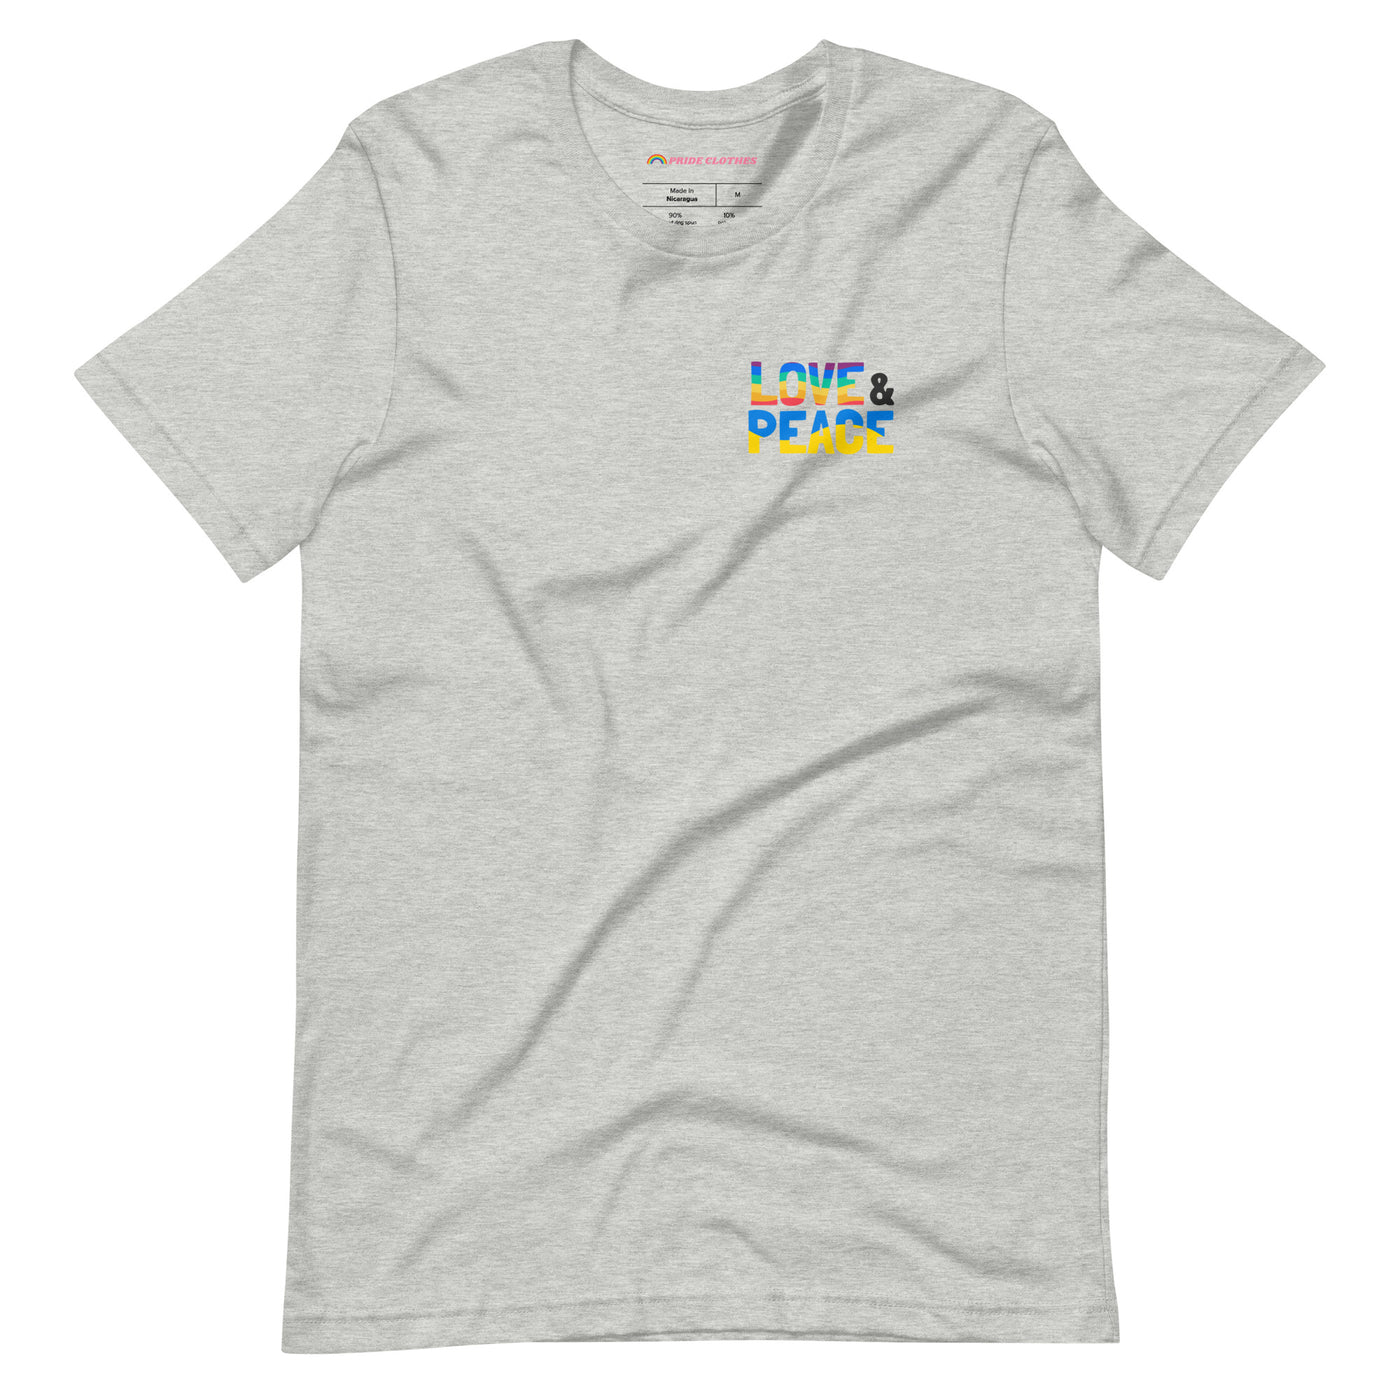 Support Ukraine and Gay Pride With This Timeless T-Shirt